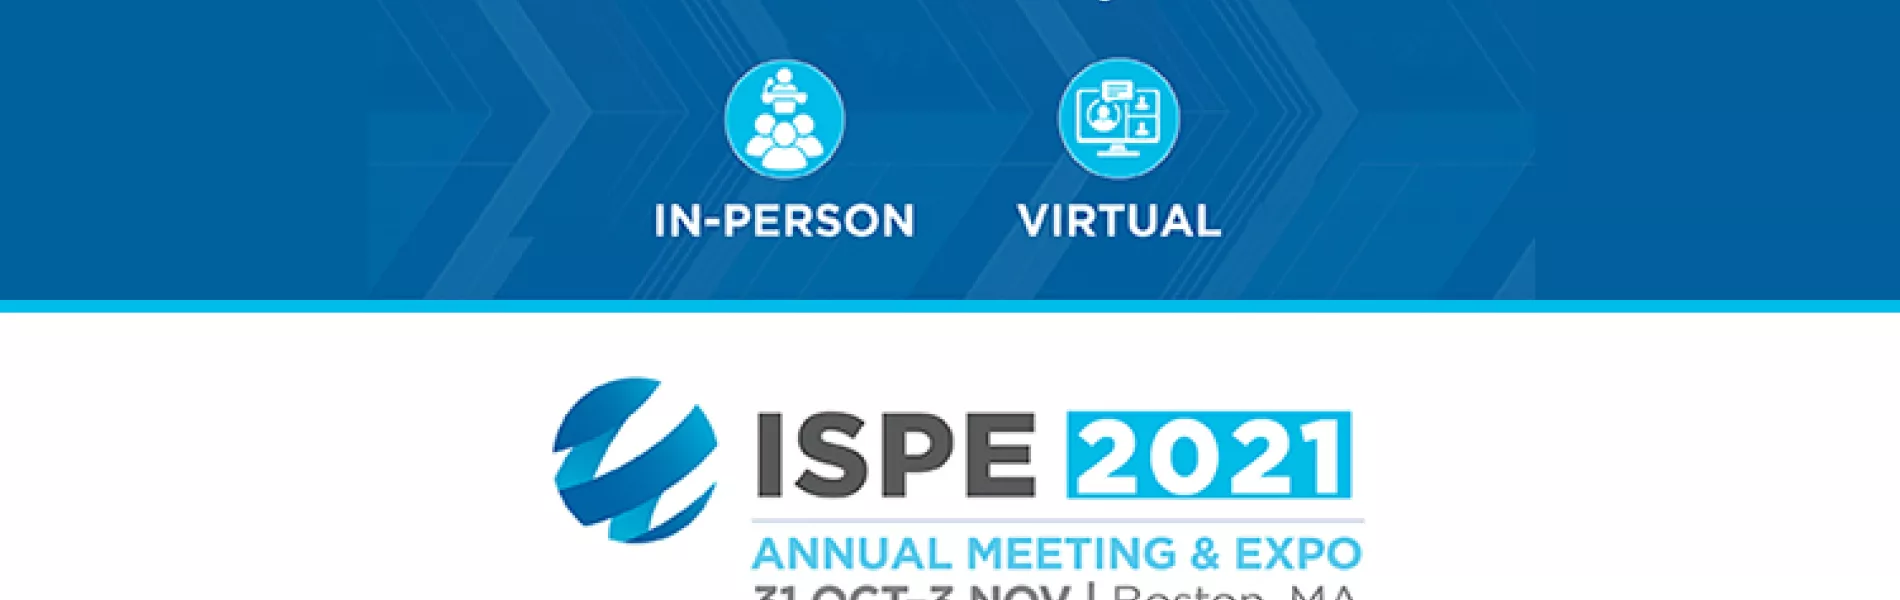 Collaborate and Innovate at the 2021 Annual Meeting & Expo